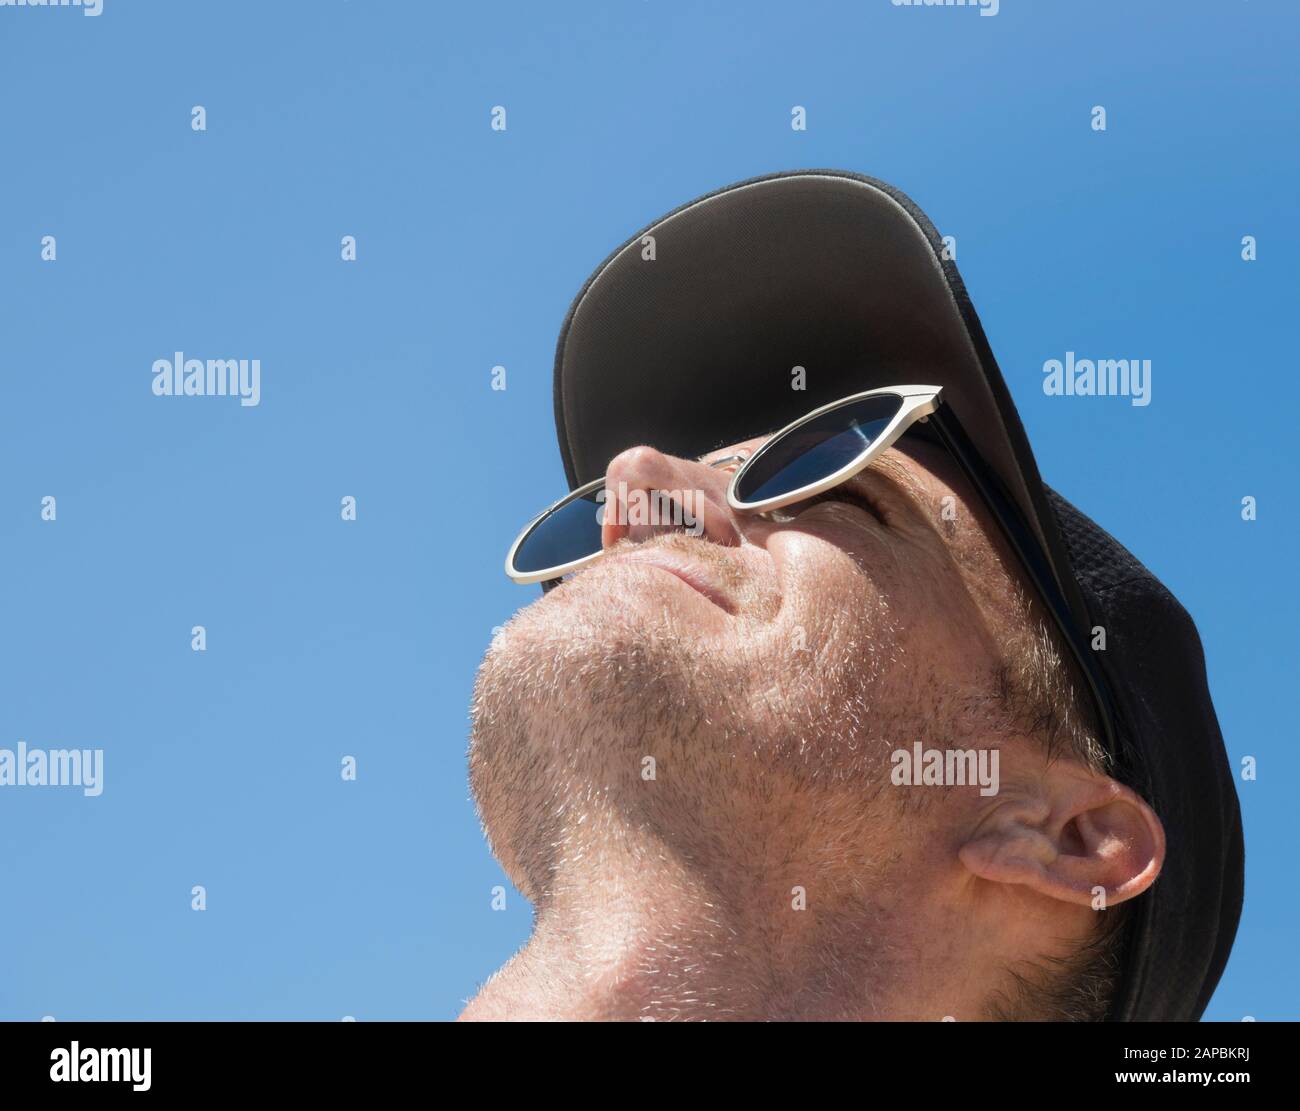 Man looking up to the sky. Stock Photo